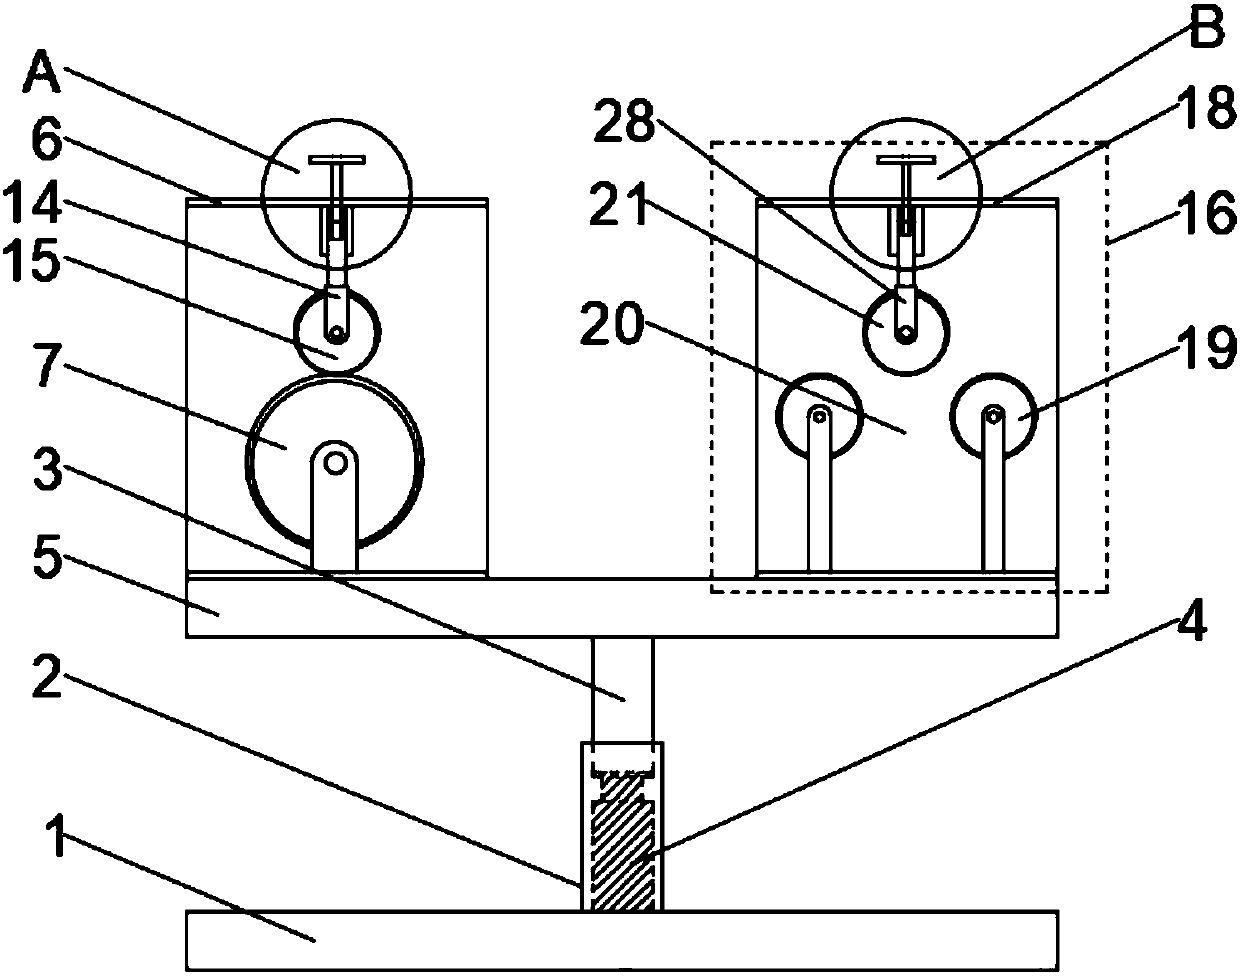 Yarn clamping mechanism for spinning machine